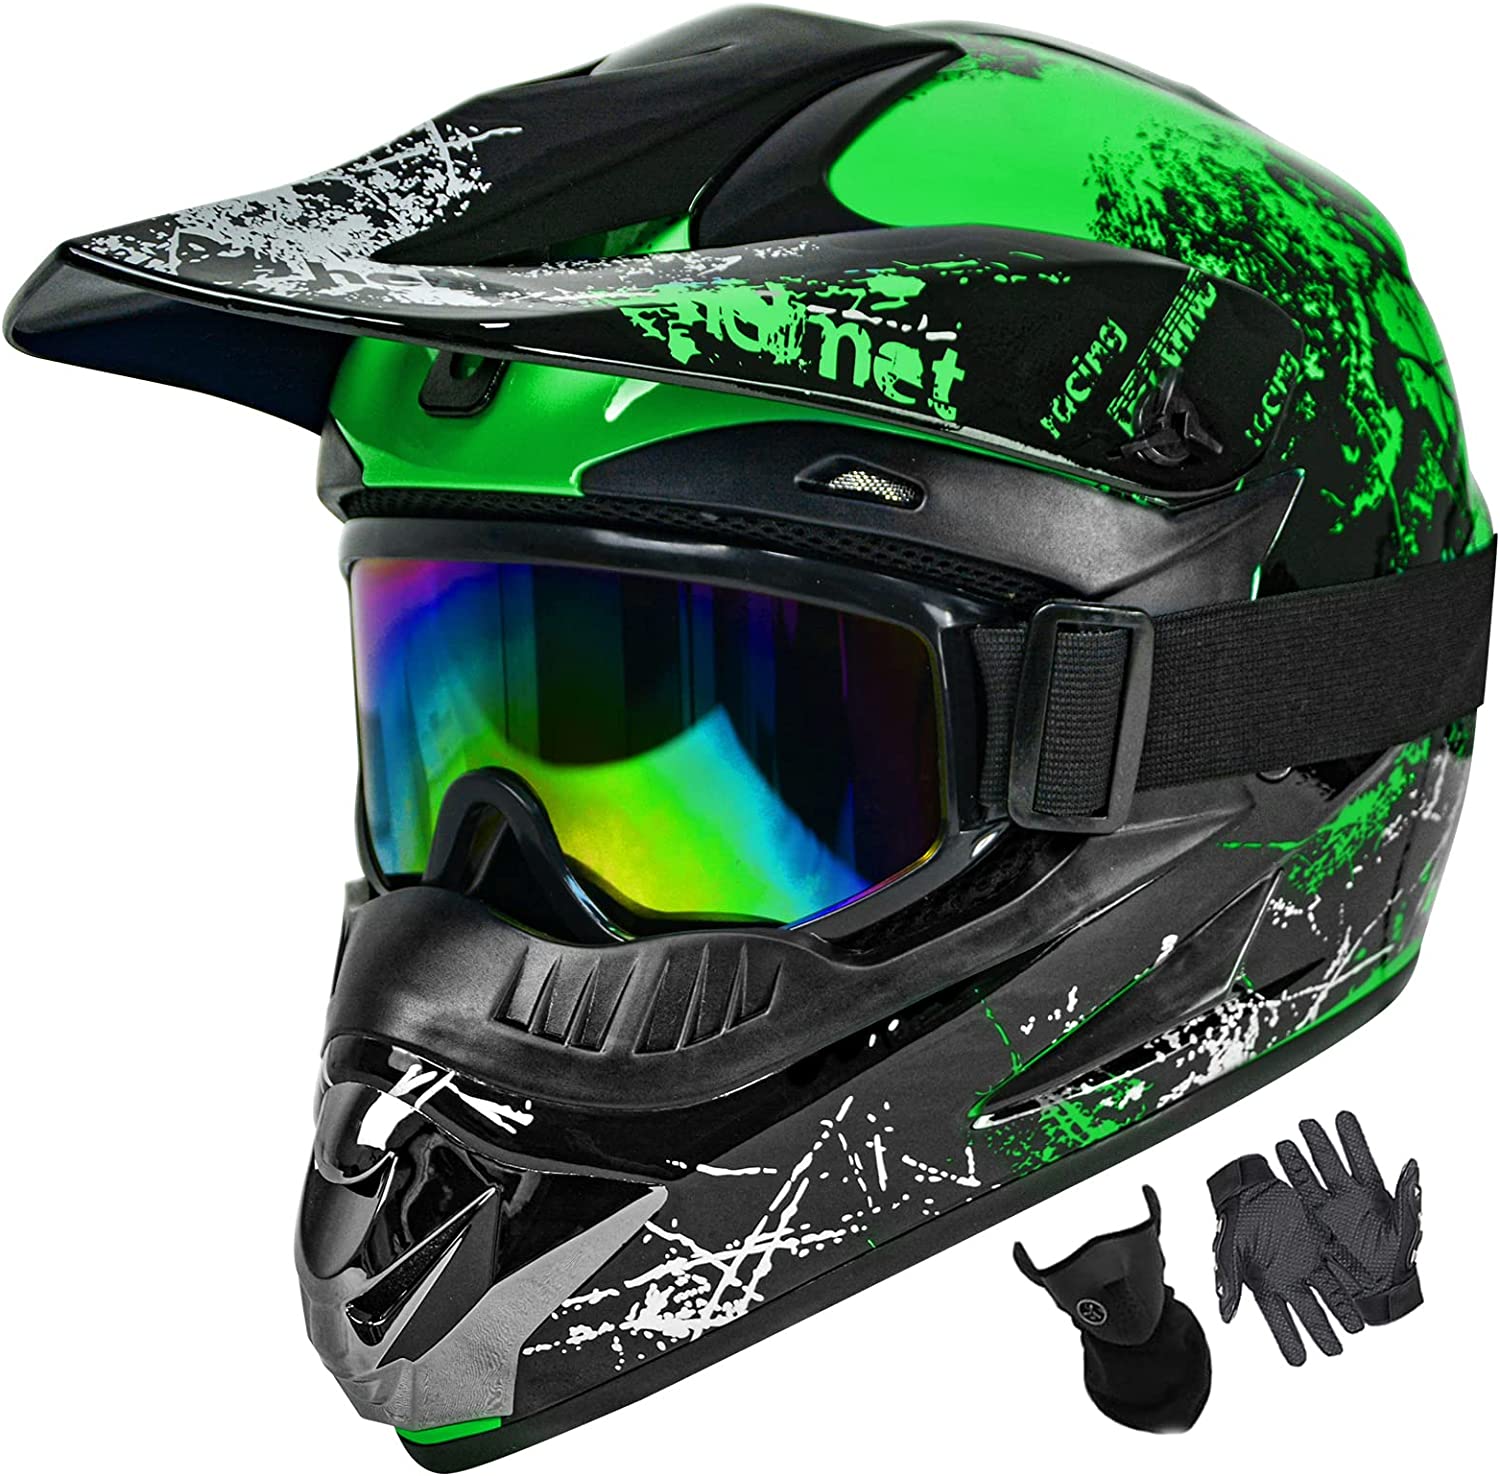 Motocross Helmet Fashion Youth Adult Dirt Bike Helmets Motorcycle Helmets for Adults DOT Approved (Gloves Goggles Face Shield) 4Pcs Set (Green, X-Large)